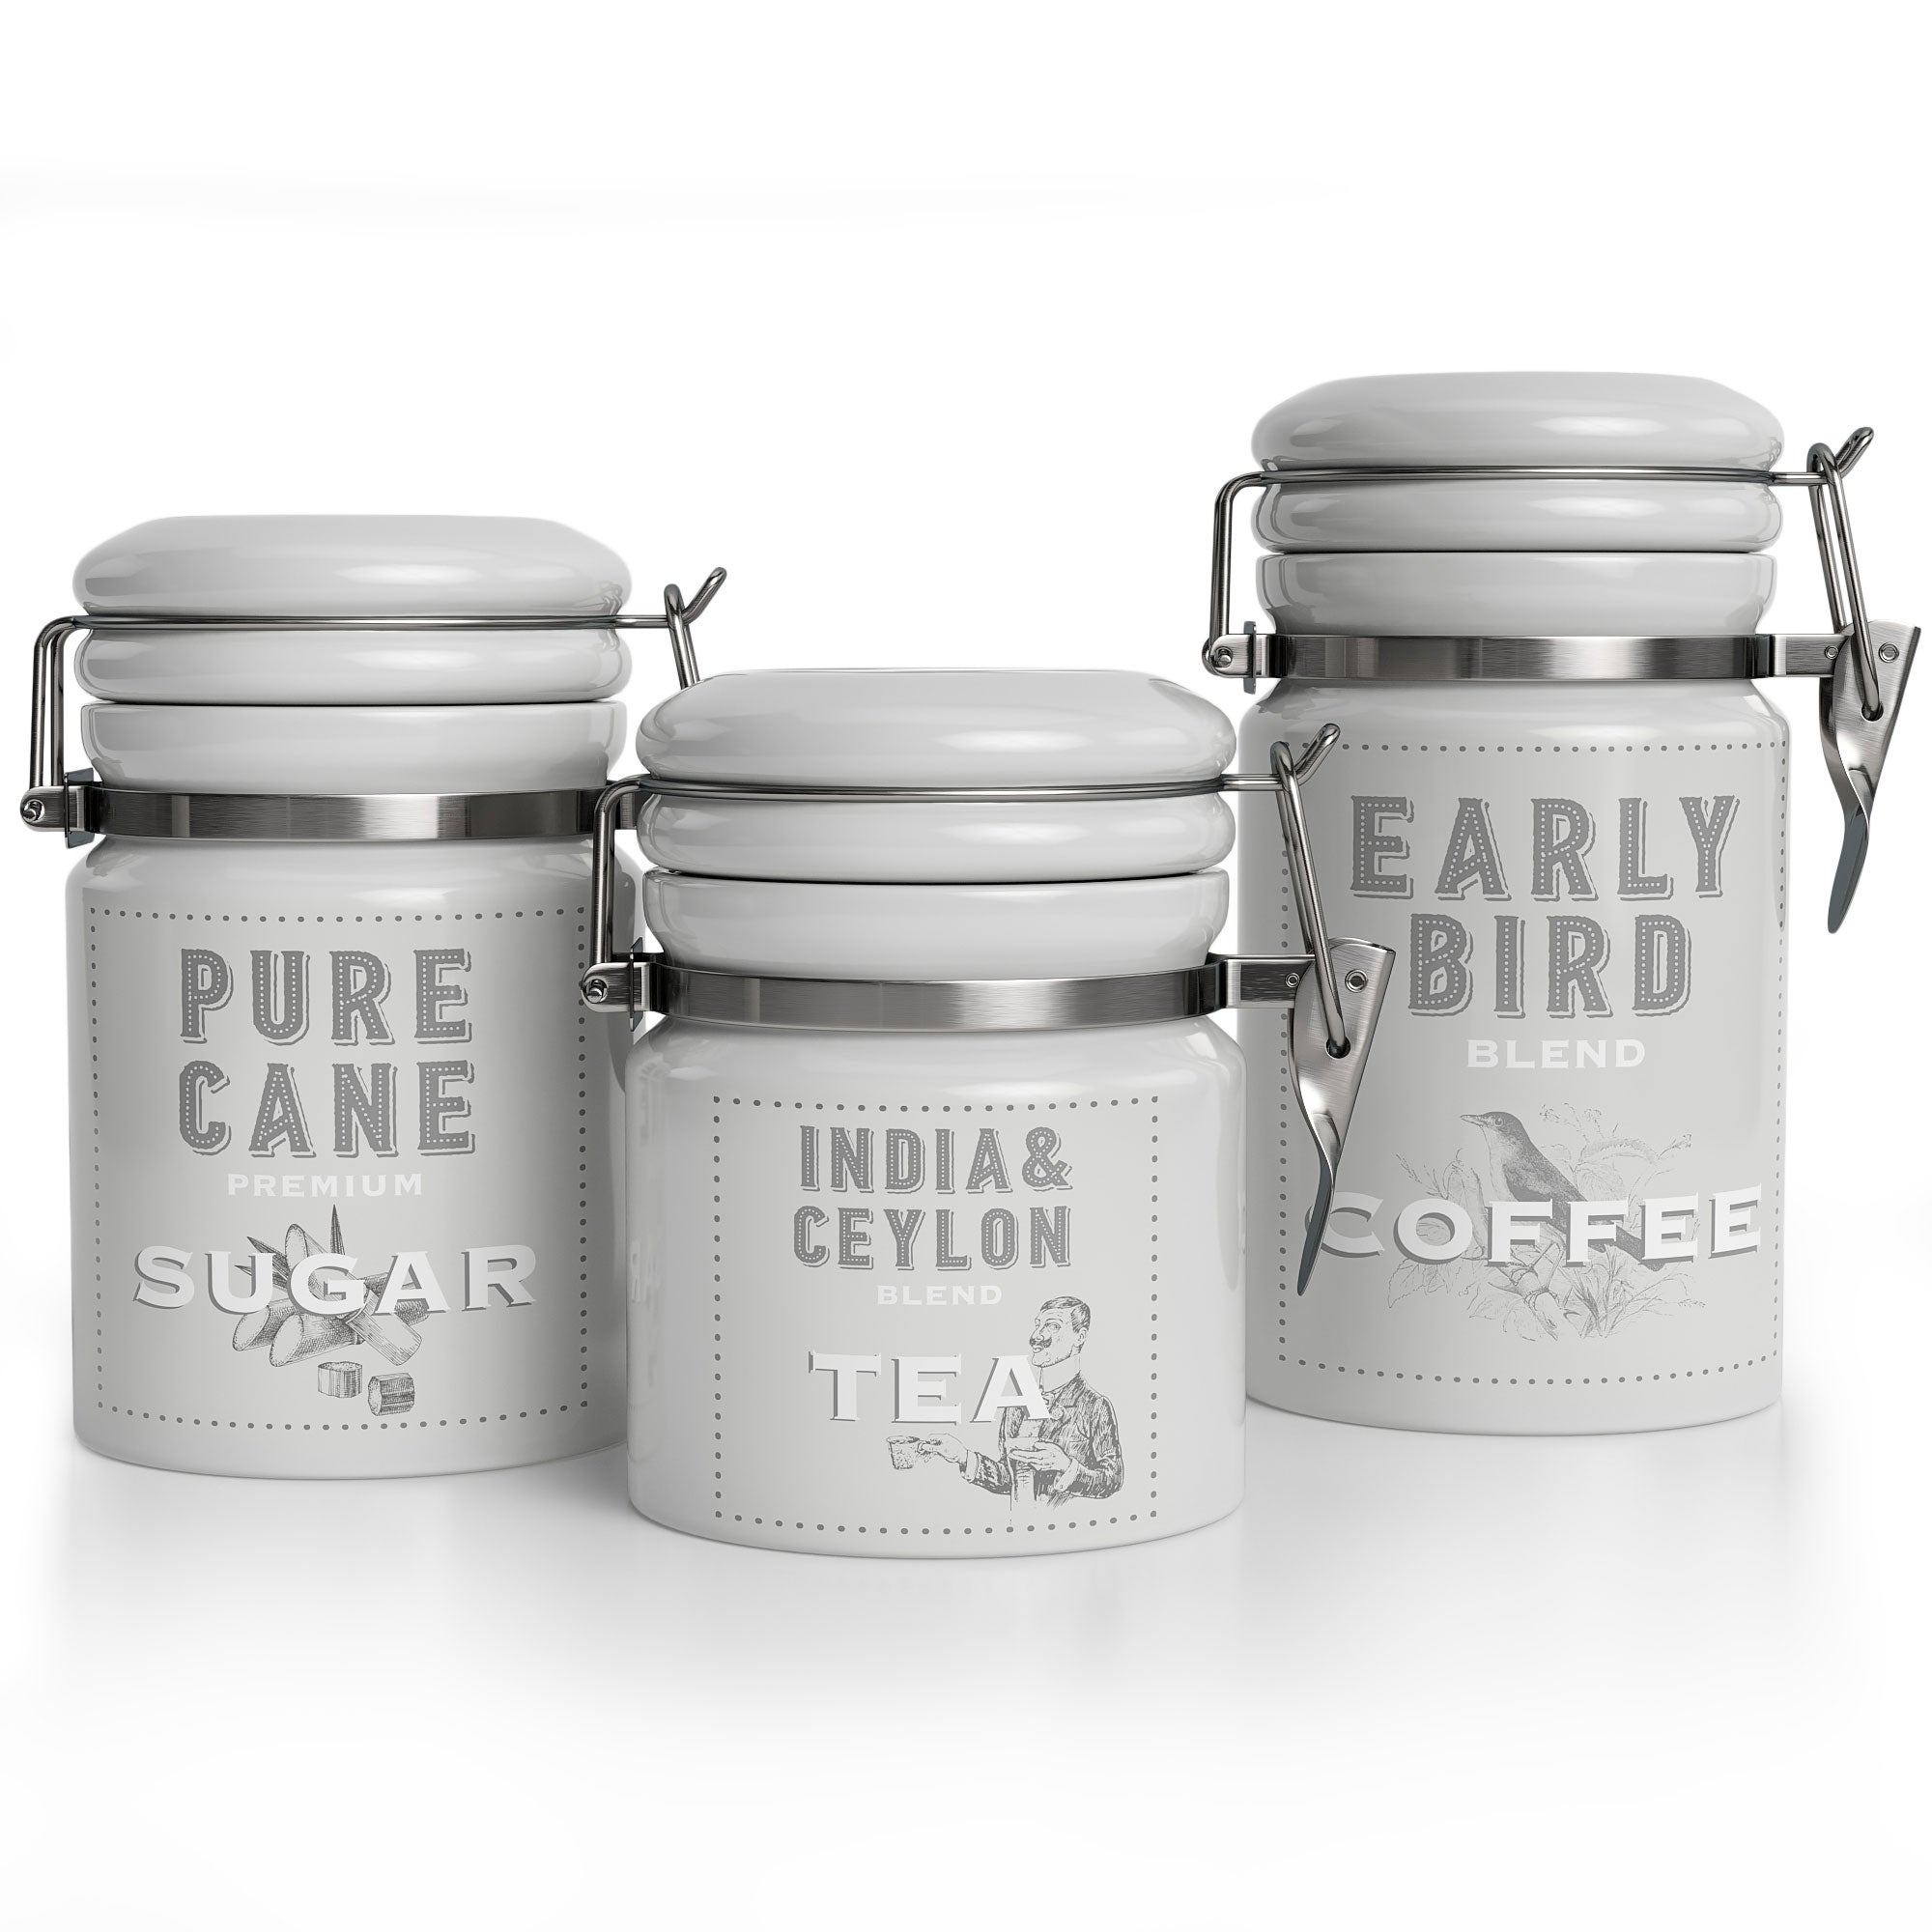 Barnyard Designs Kitchen Canister Set, Ceramic Canisters with Lid,  Decorative Coffee, Sugar, Tea, Storage Containers for Kitchen Counter,  Rustic Farmhouse Decor, Grey, Set of 3